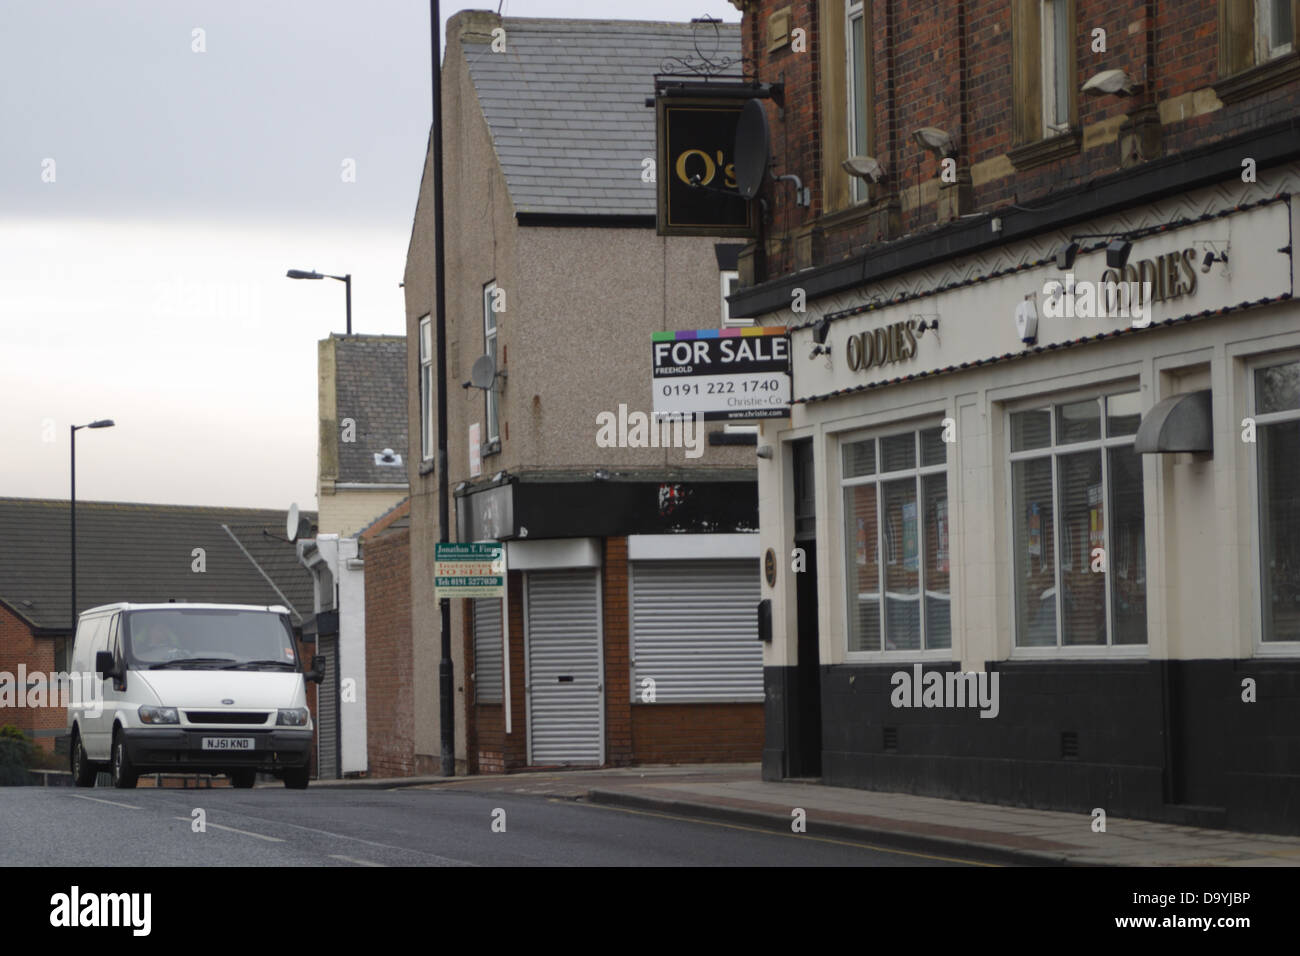 Oddies pub, a public house on hylton road in sunderland., a corner shop is  also visible, as well as a van Stock Photo - Alamy